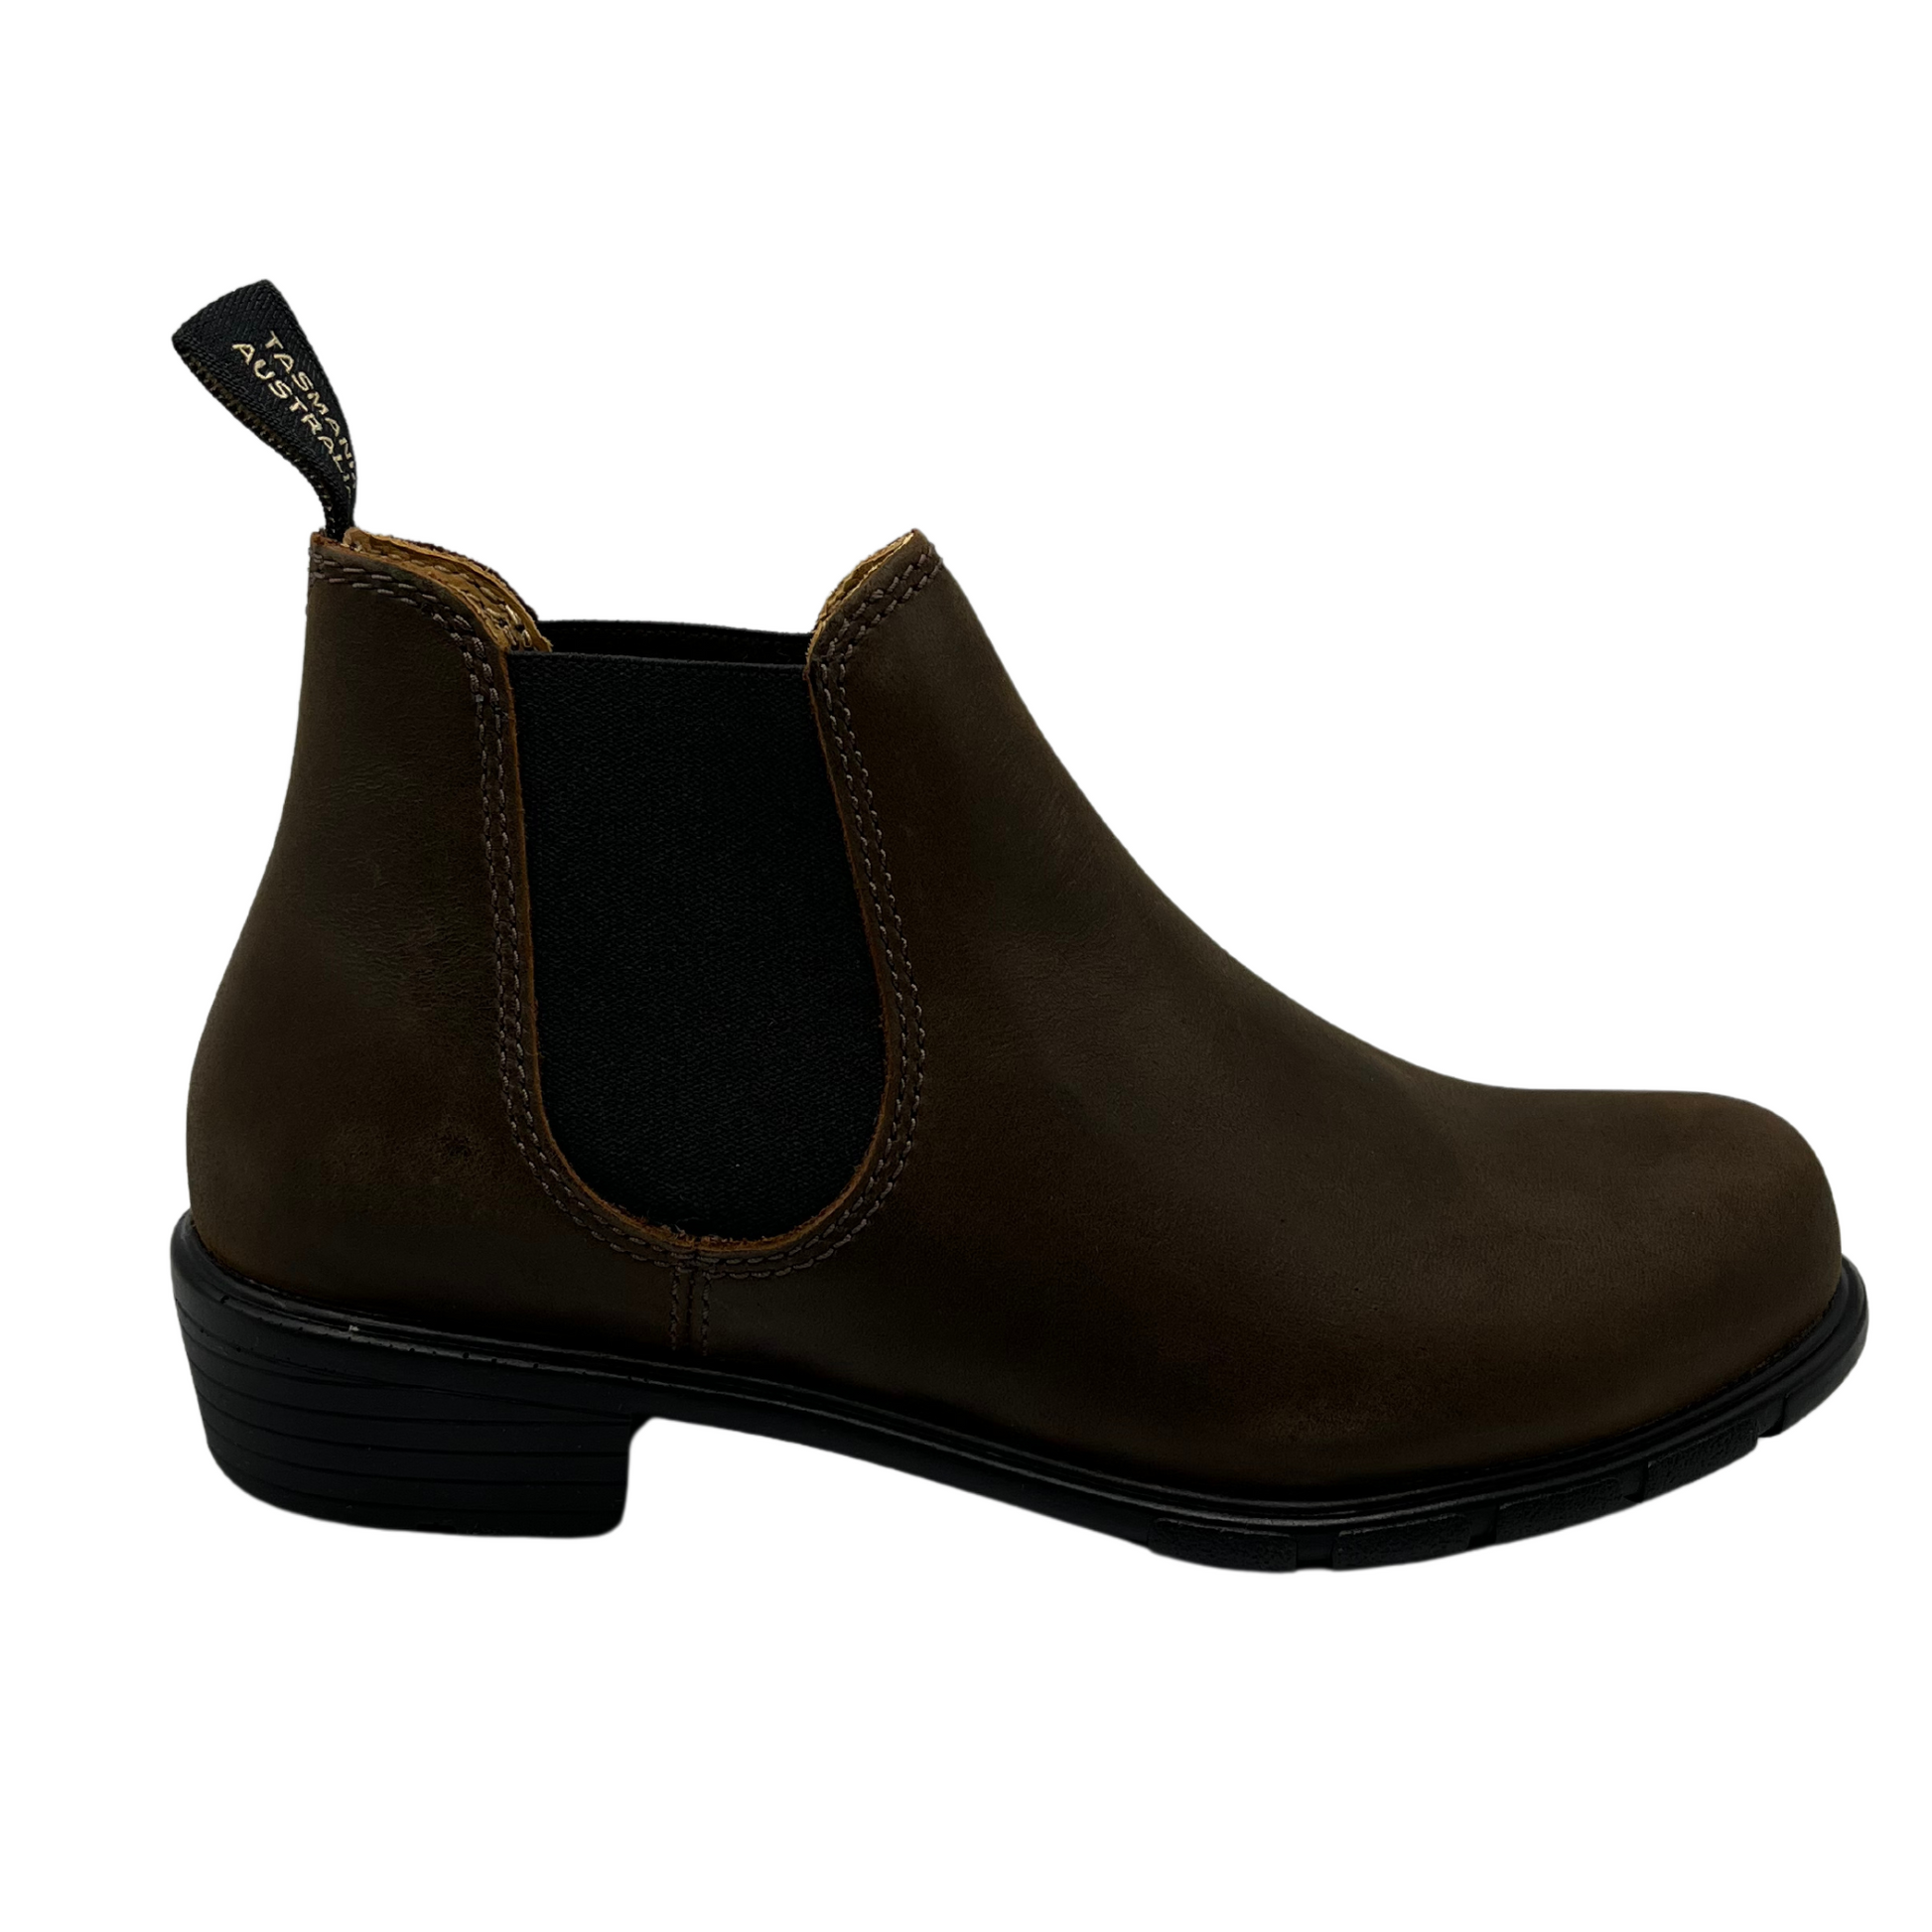 Right facing view of brown leather ankle boot with elastic side gore